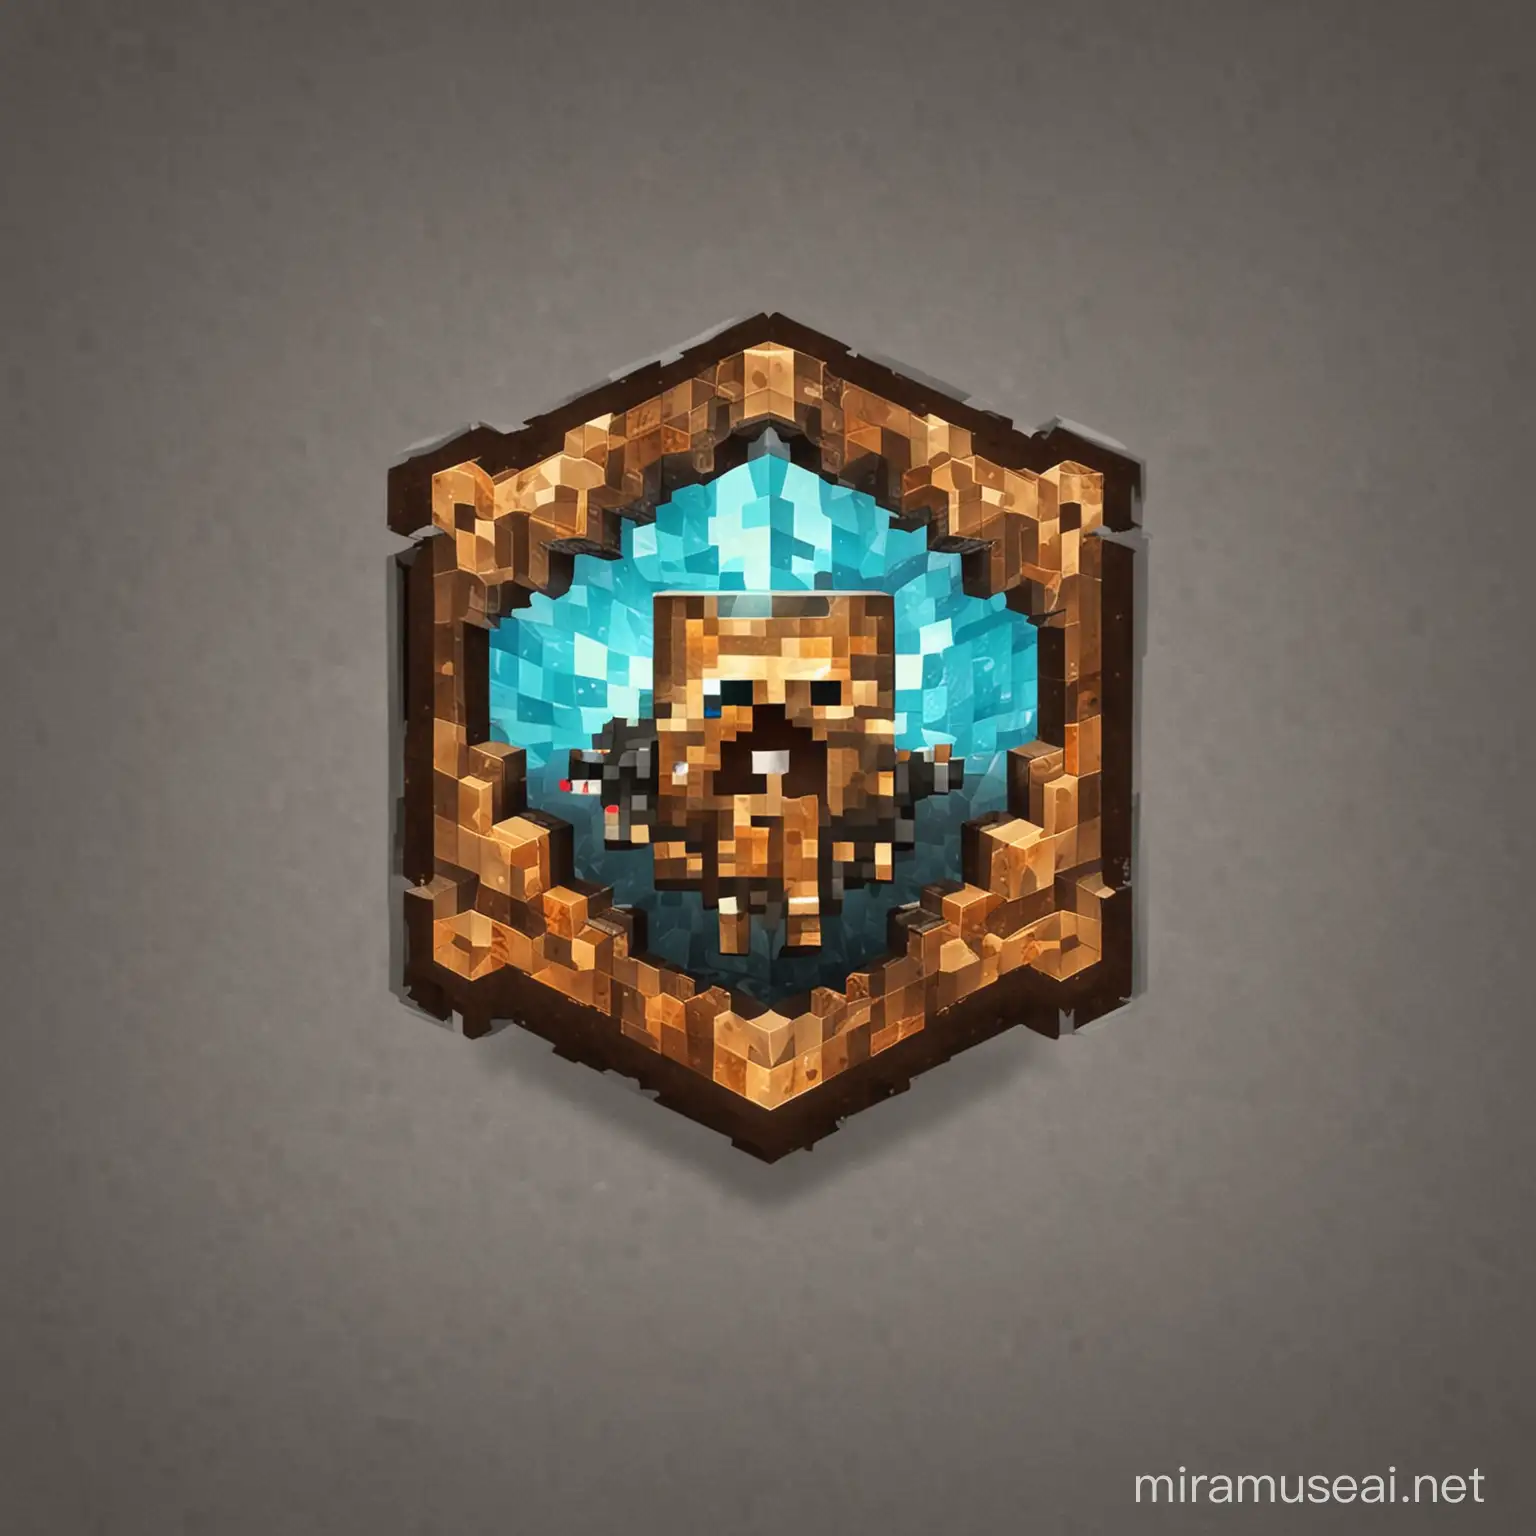 minecraft server icon. The server name is AsterelCraft. not astercraft